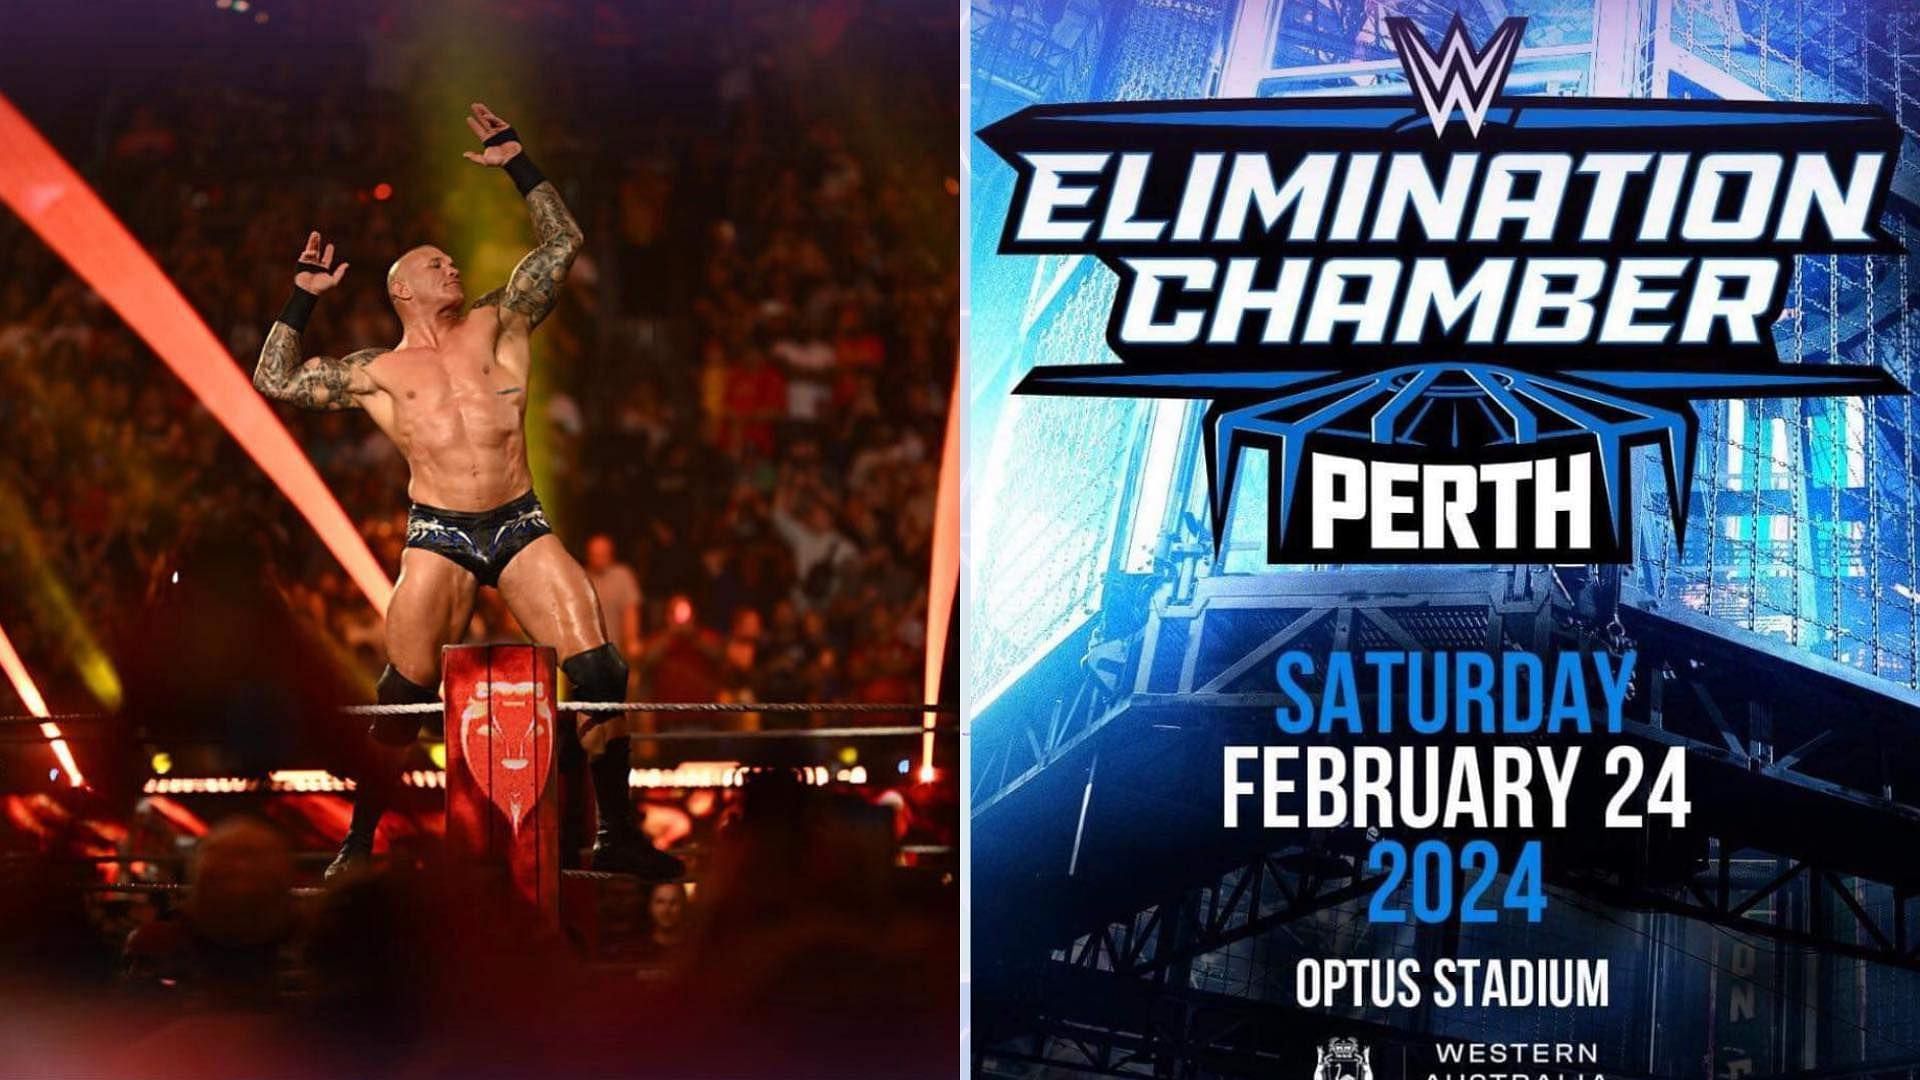 Some WWE performers could turn heel at Elimination Chamber Perth